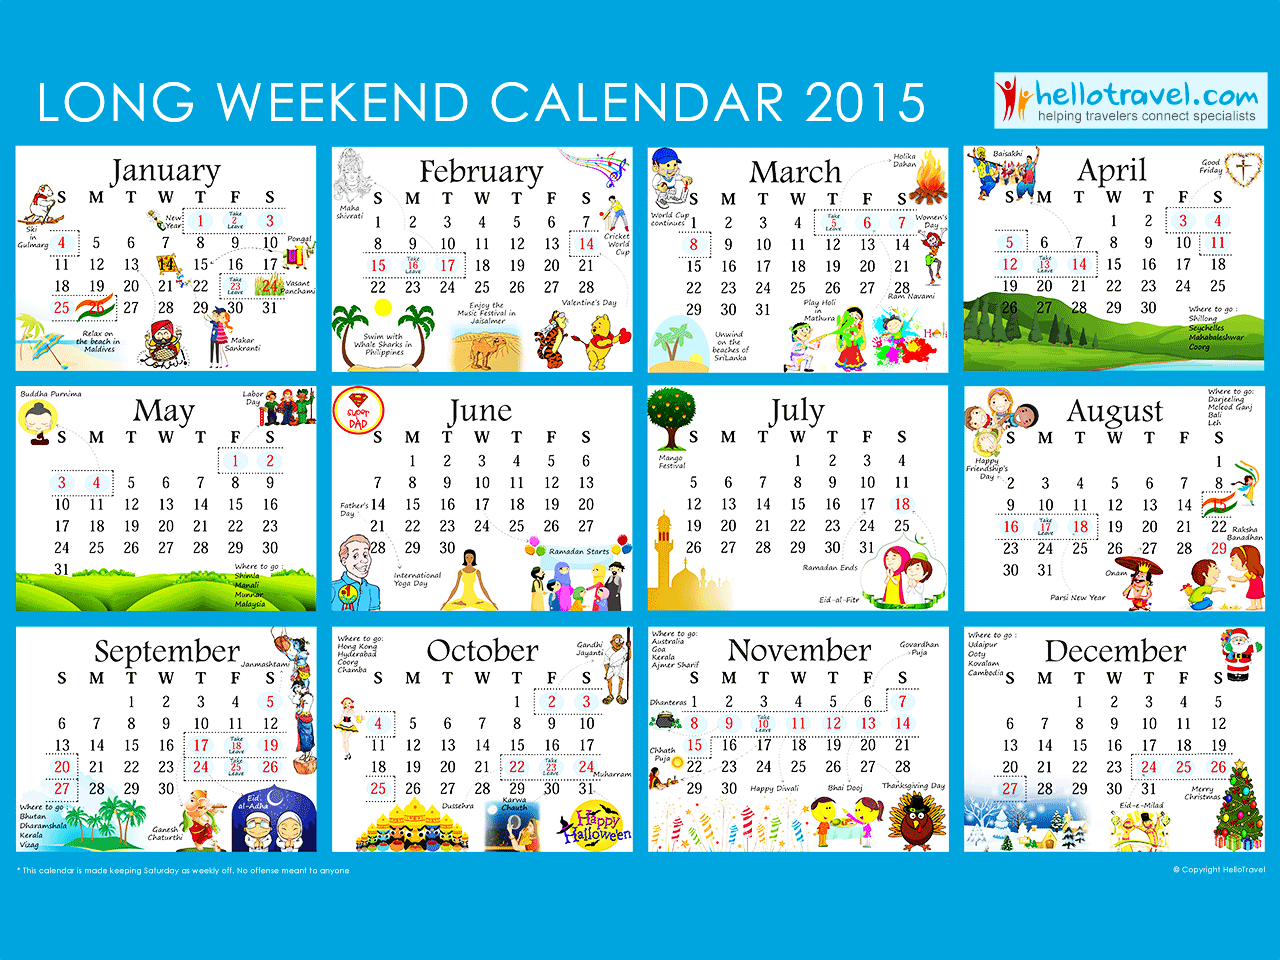 Ultimate Guide to the Long Weekends of 2015, The Busiest LongWeekends